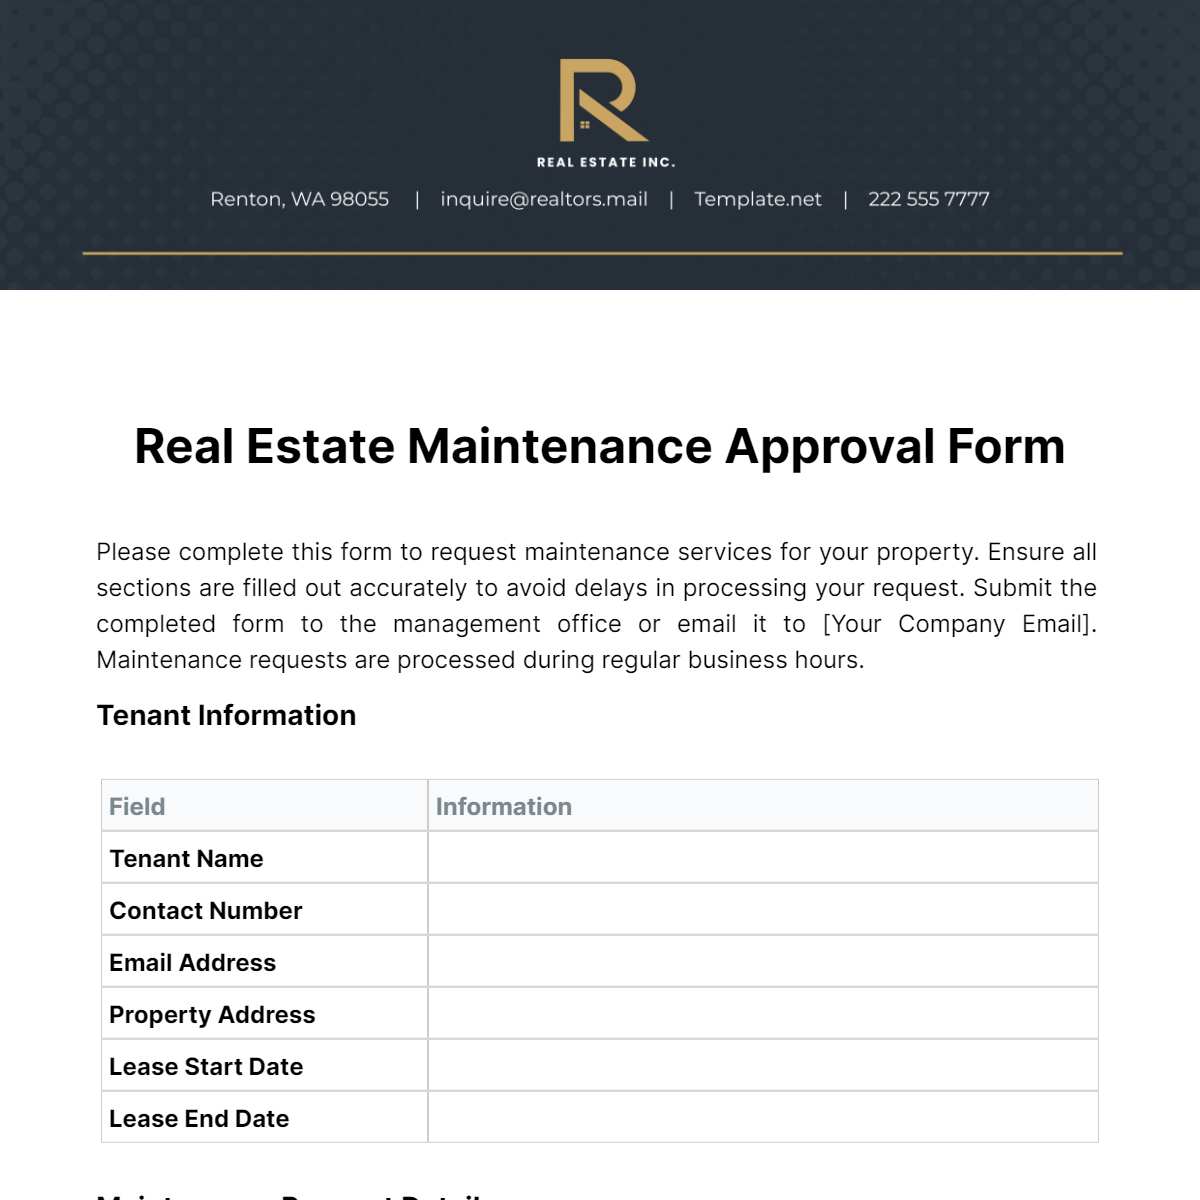 Real Estate Maintenance Approval Form Template